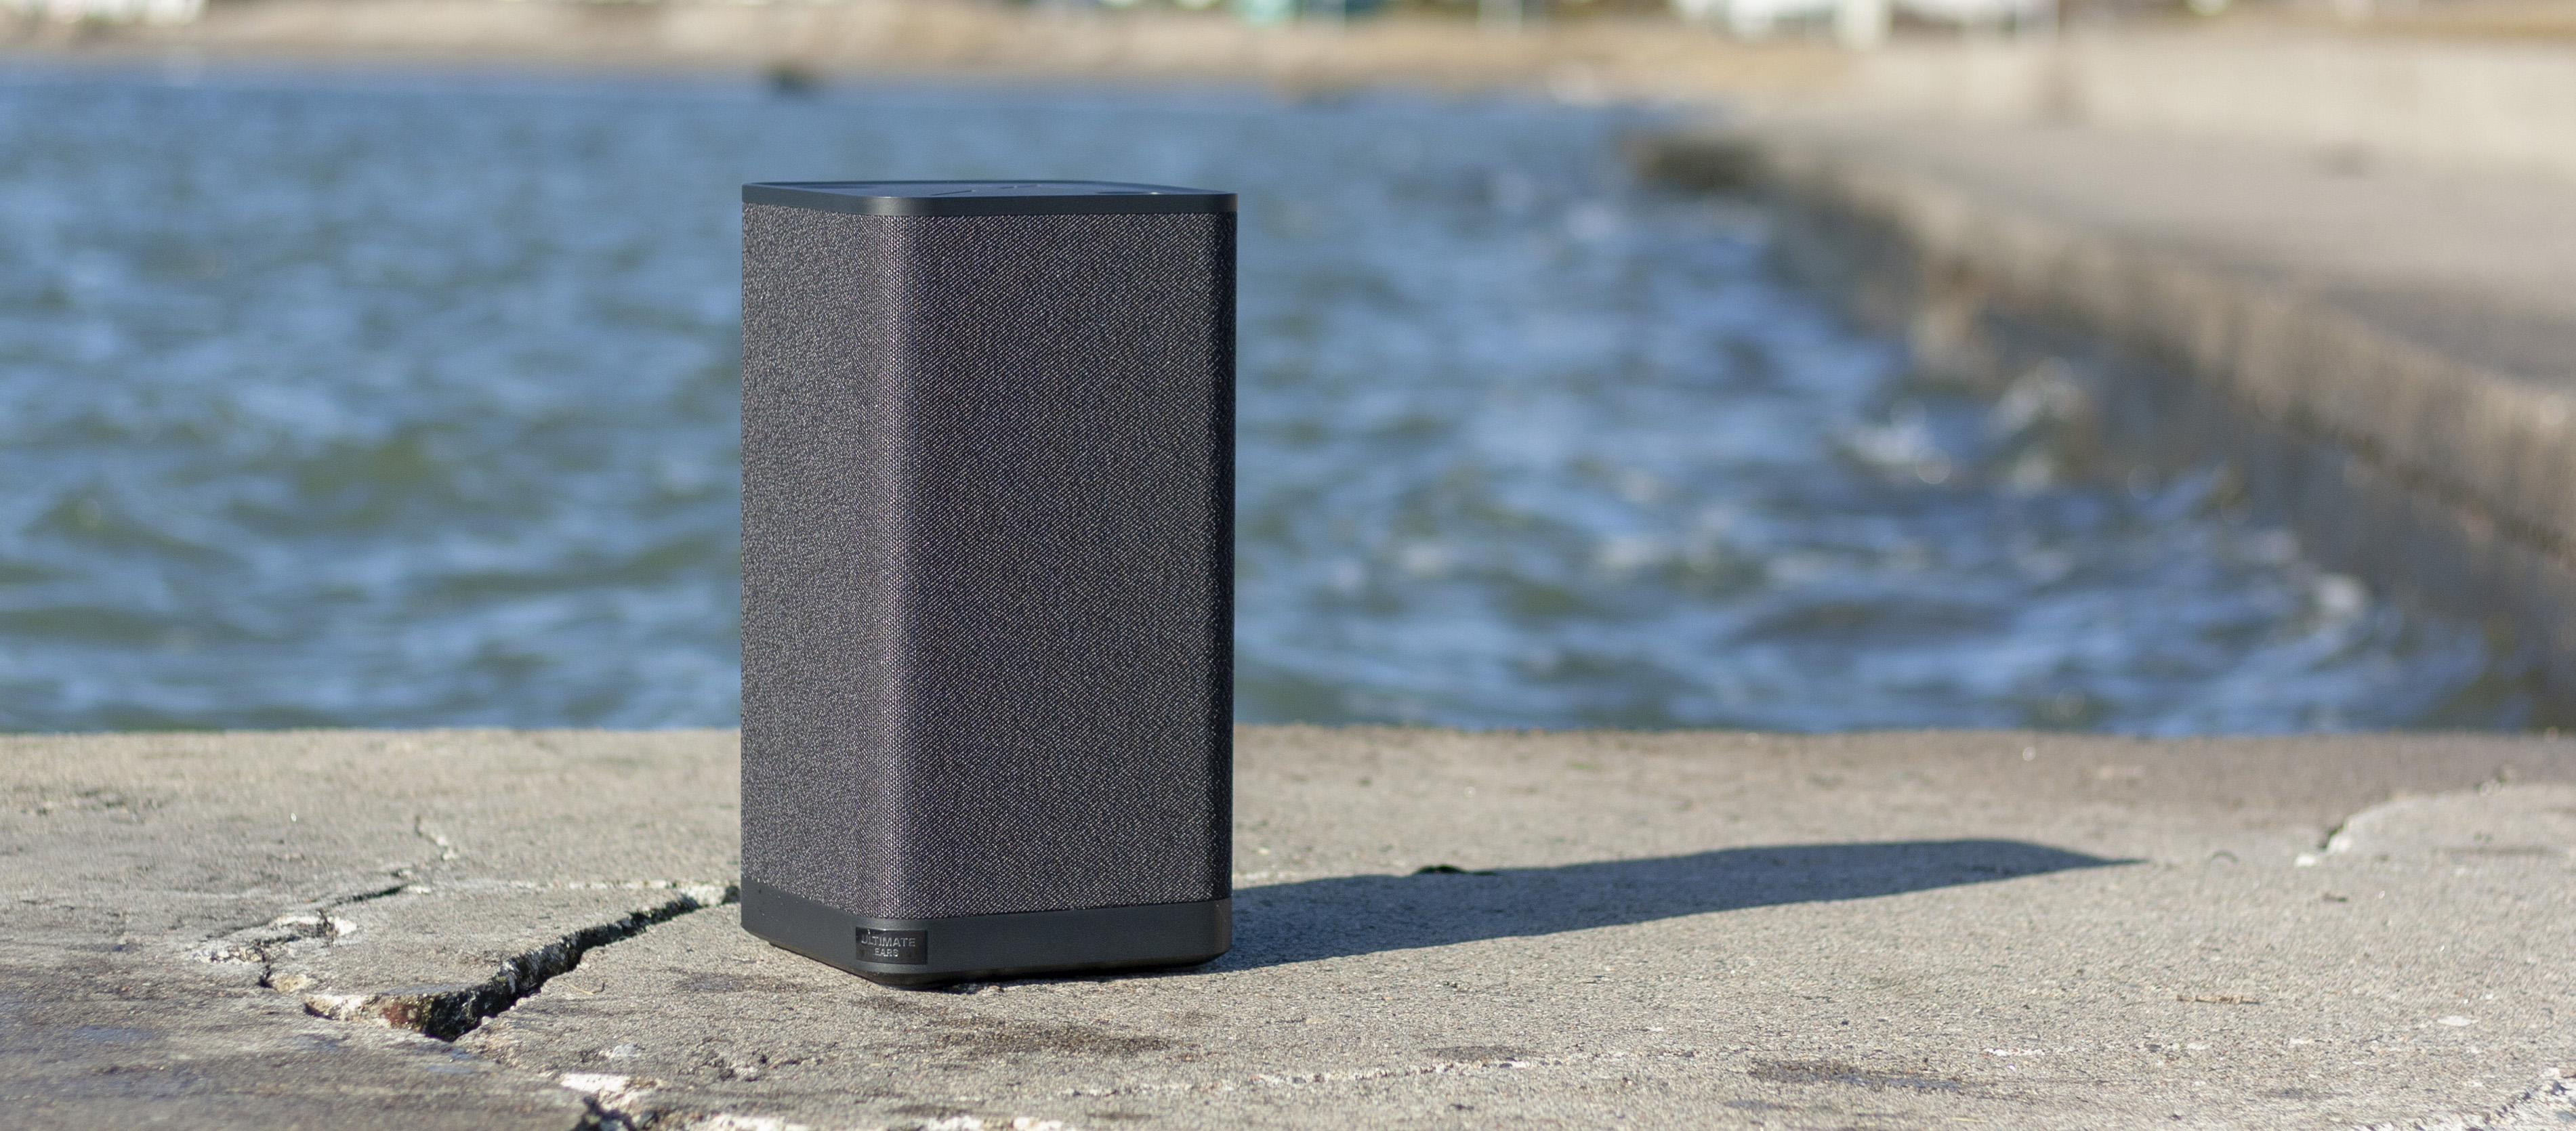 Ultimate Ears Hyperboom speaker review: Portable, wireless and